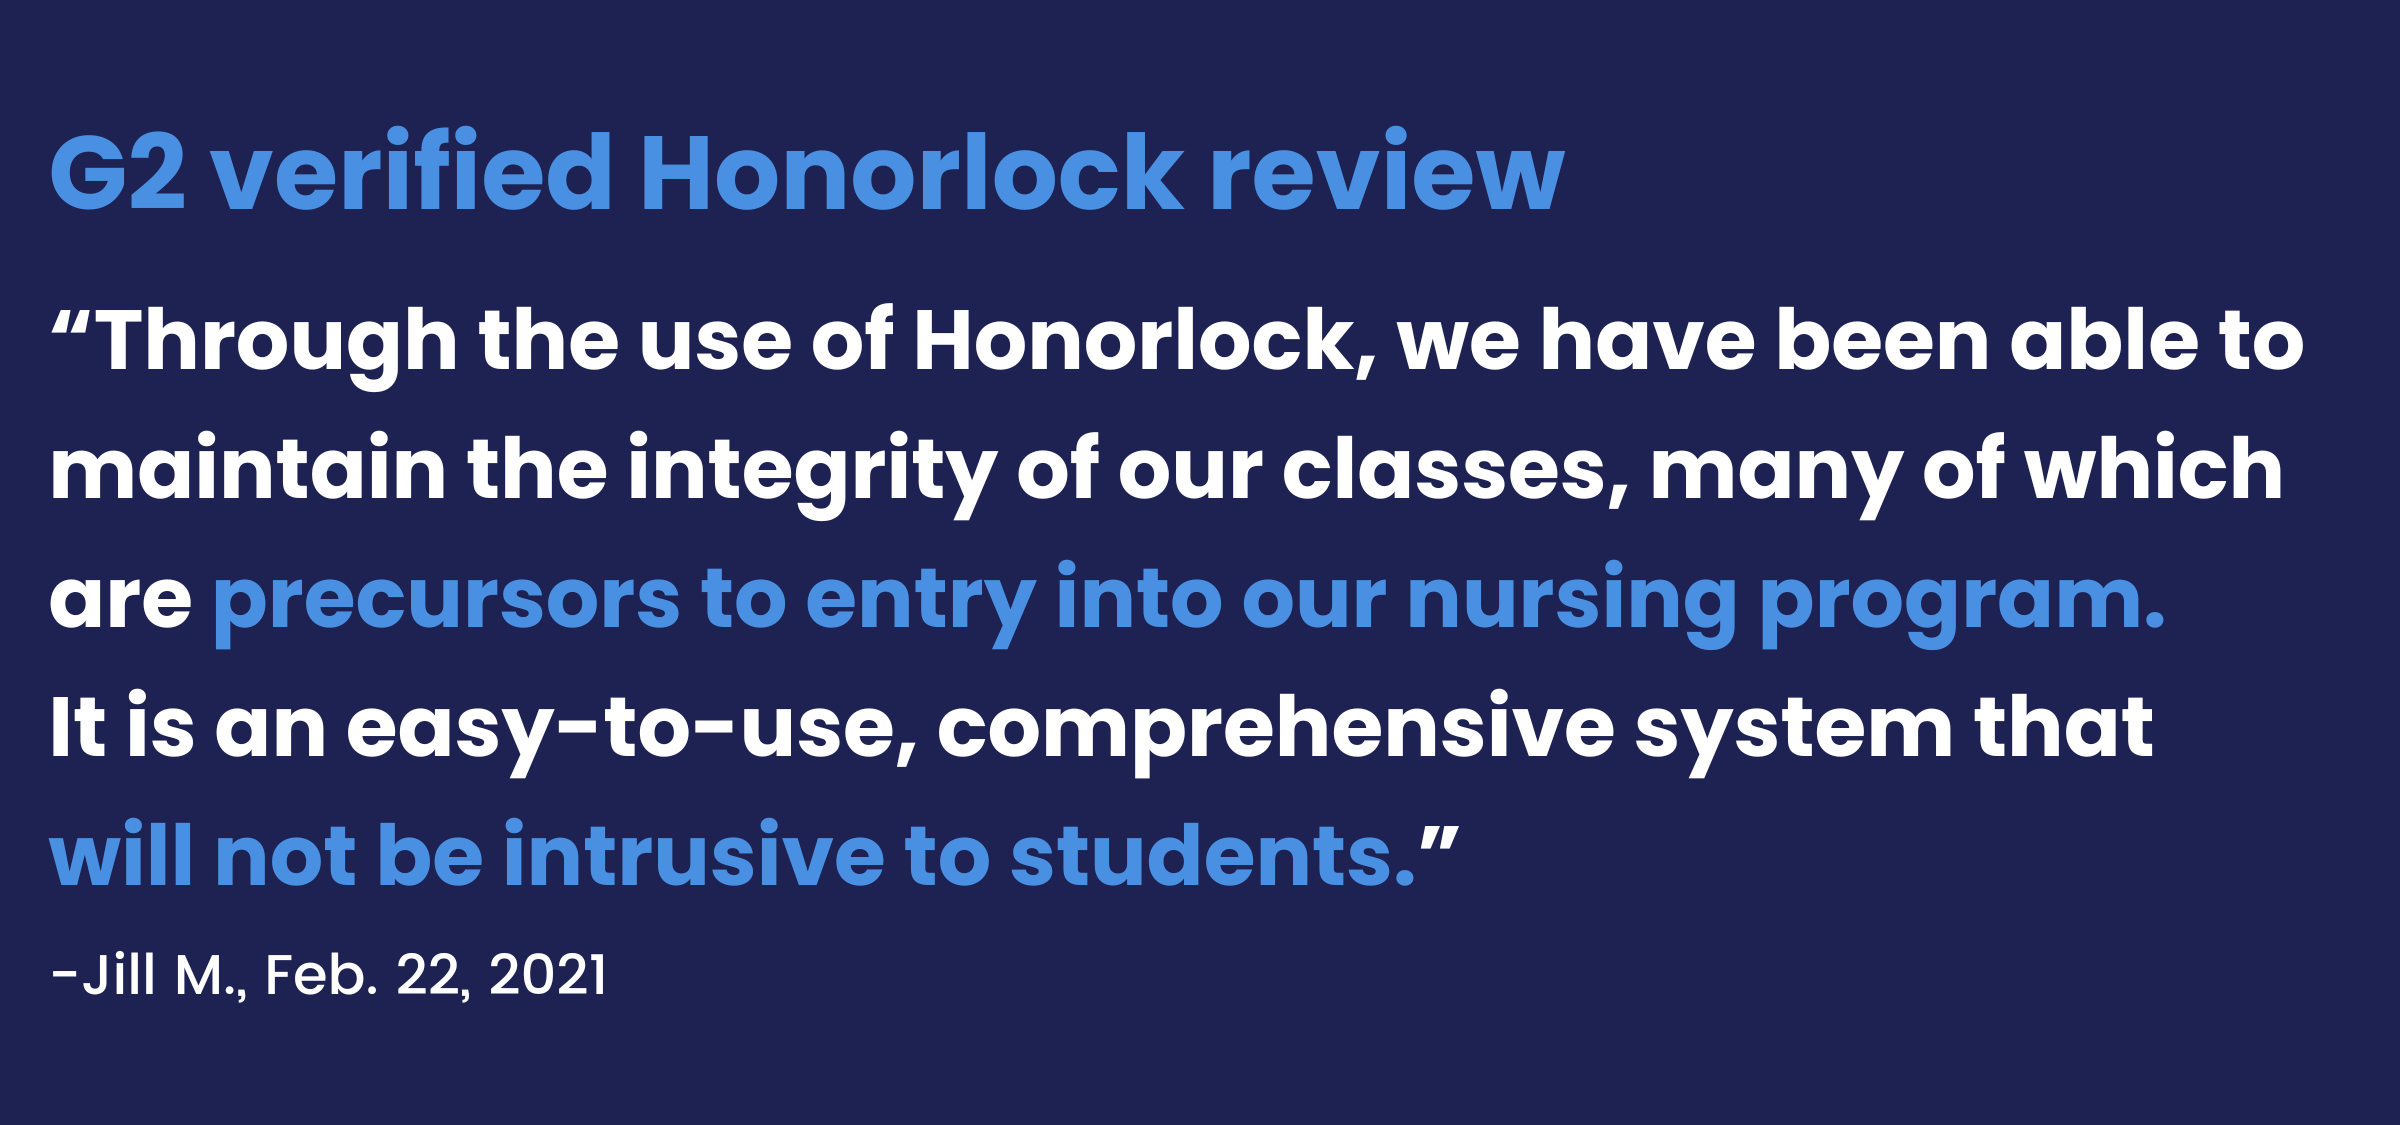 Honorlock review about its proctoring solution for online nursing exams